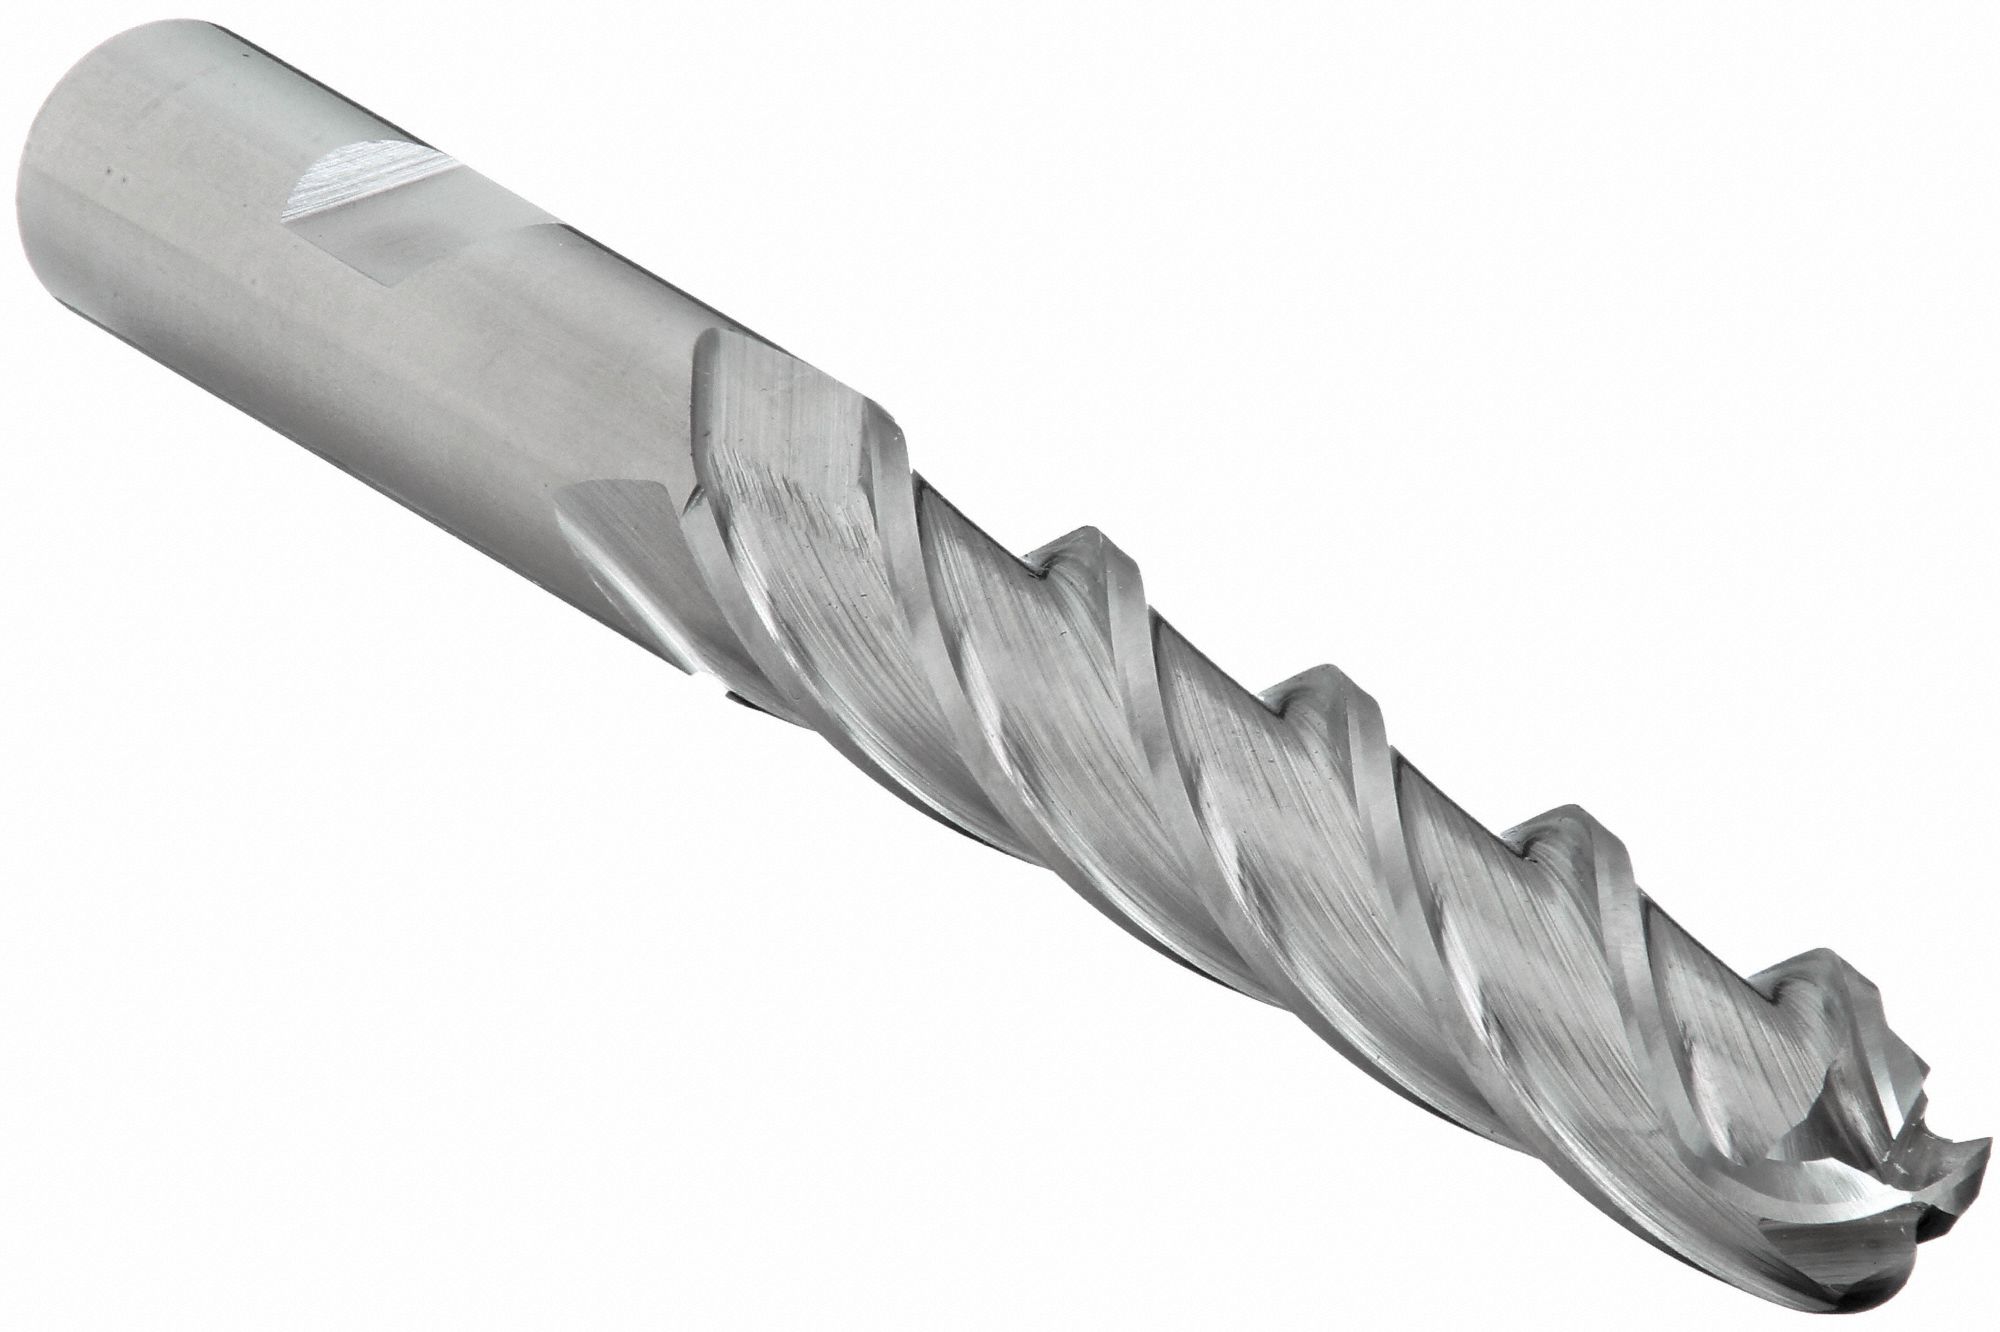 BALL END MILL, 4 FLUTES, 0.75 IN MILLING DIAMETER, 4 IN CUT, 6.25 IN LENGTH, HSS